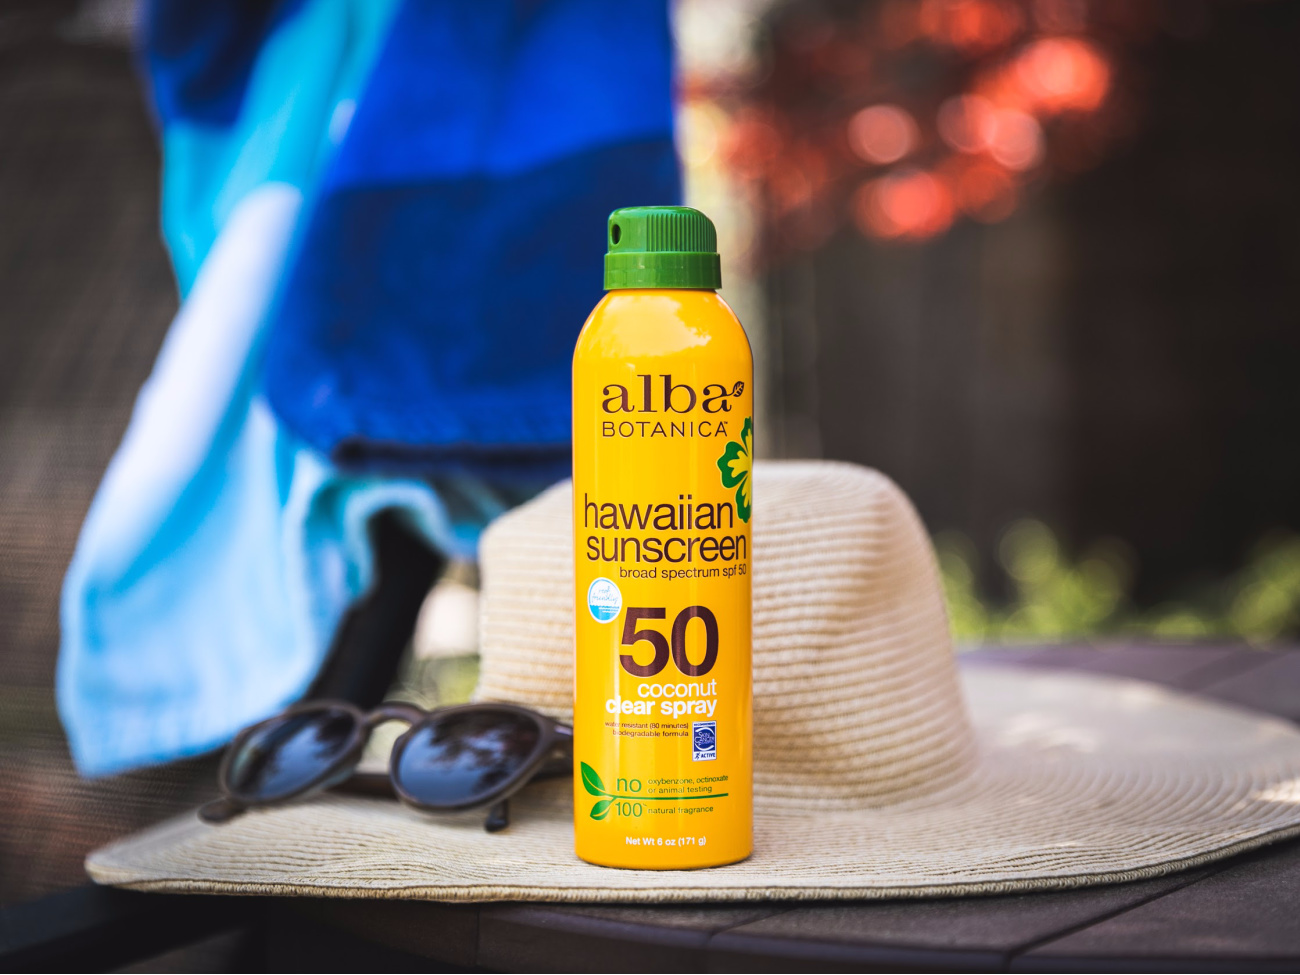 Stay Protected This Holiday Weekend & Get Savings On Alba Botanica Suncare At Publix on I Heart Publix